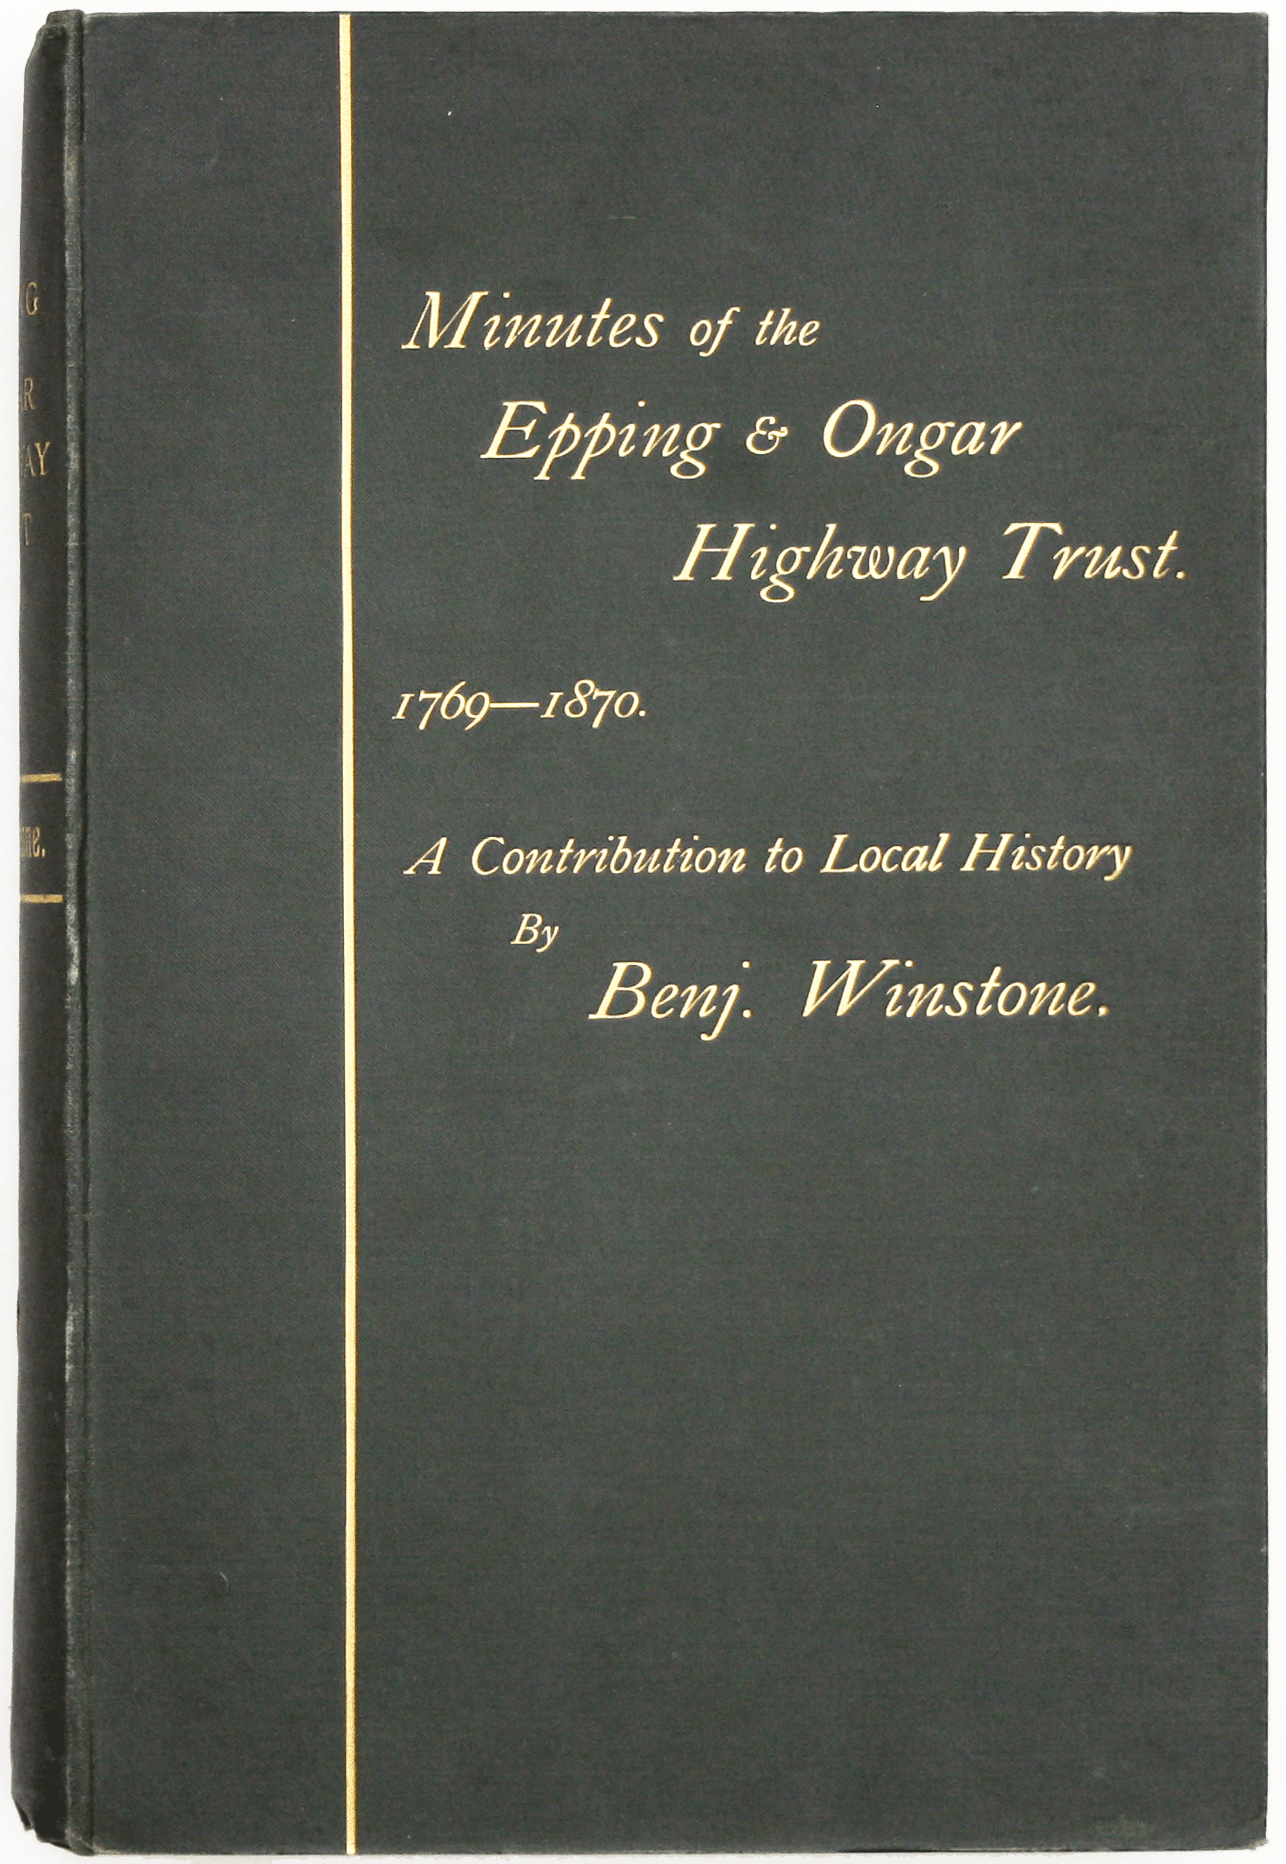 Winstone’s History of the Epping & Ongar Highway Trust